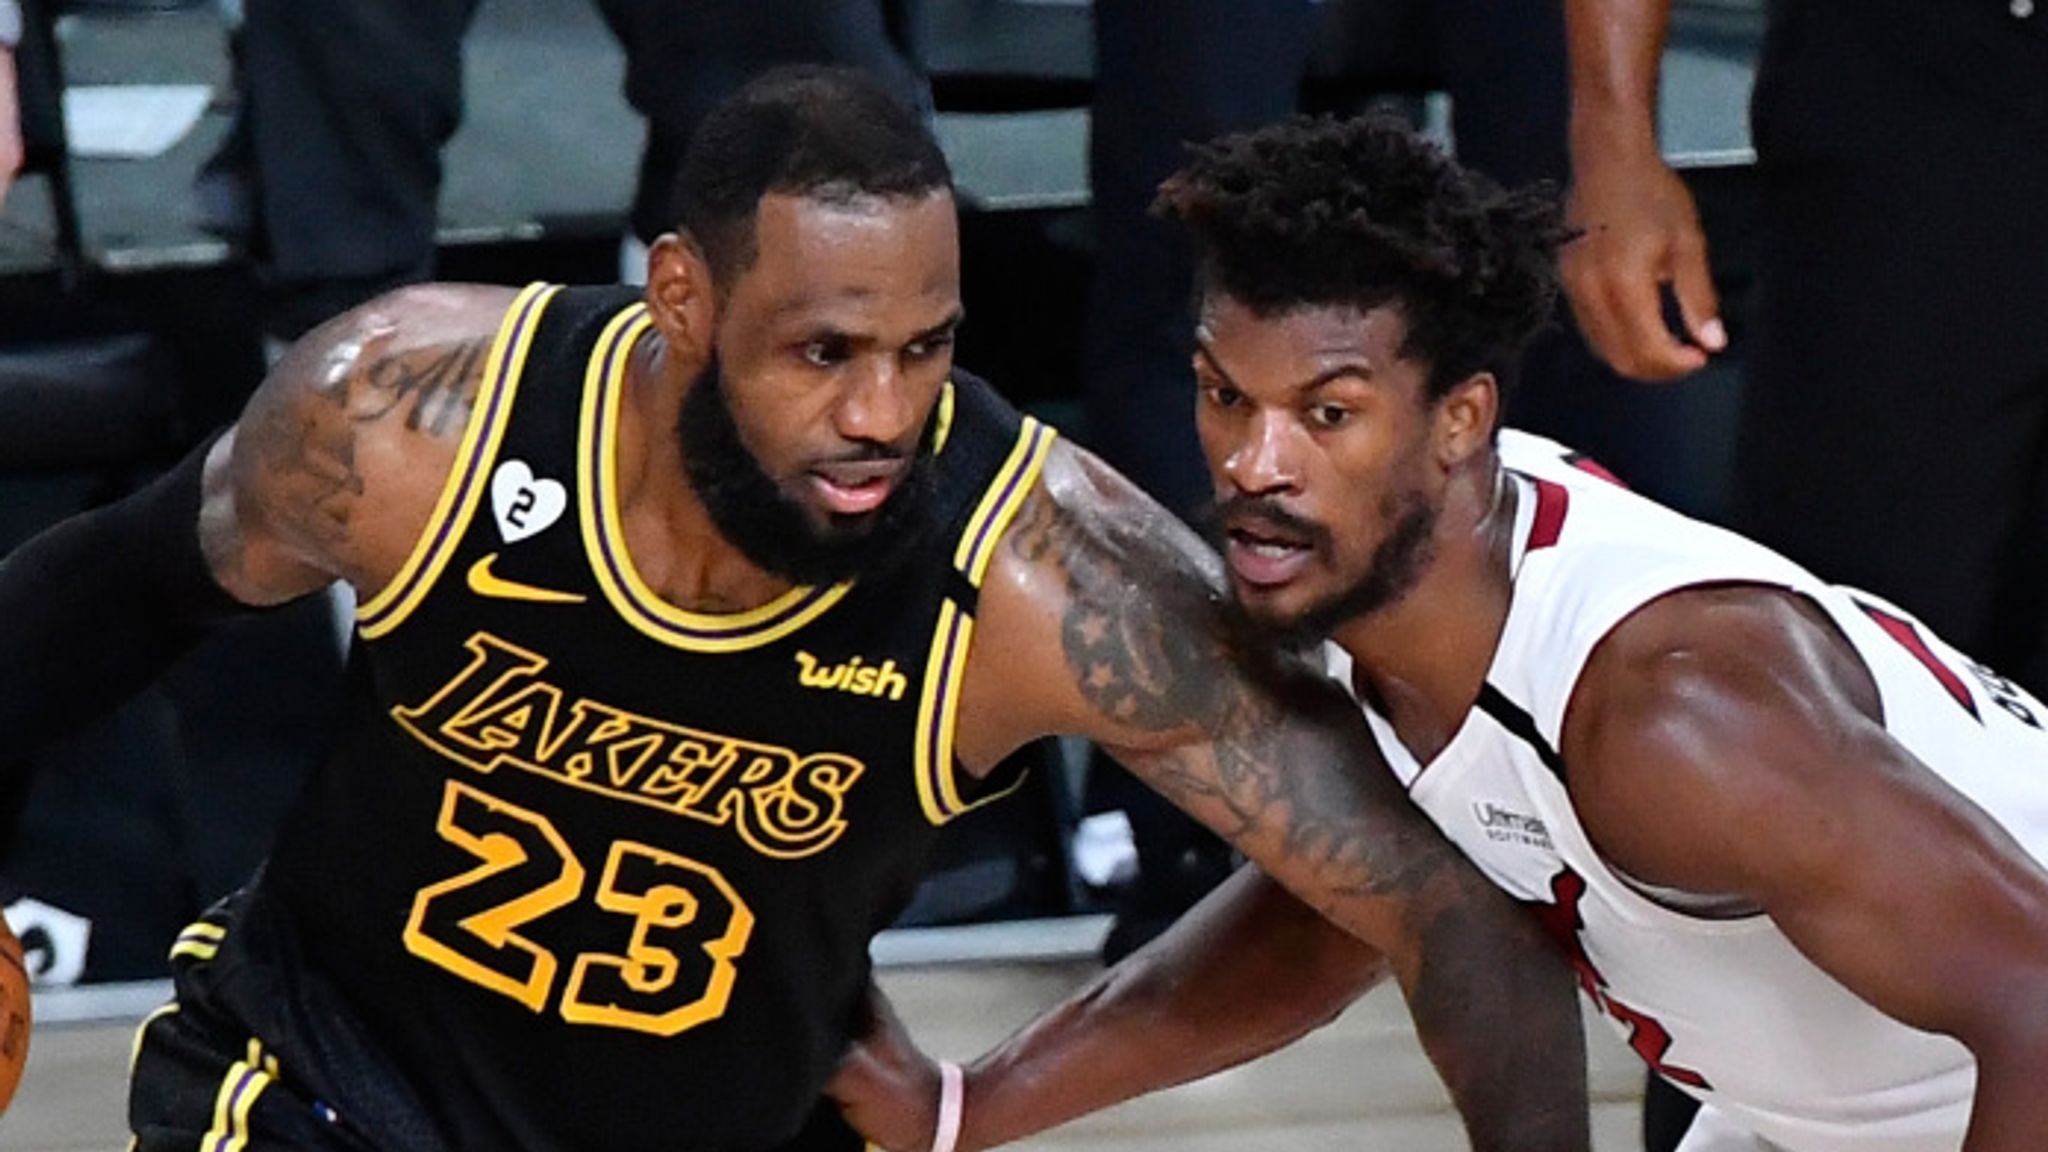 Nba Finals 2020 Intensity Rises For Lakers And Heat As Game 6 Looms Nba News Sky Sports